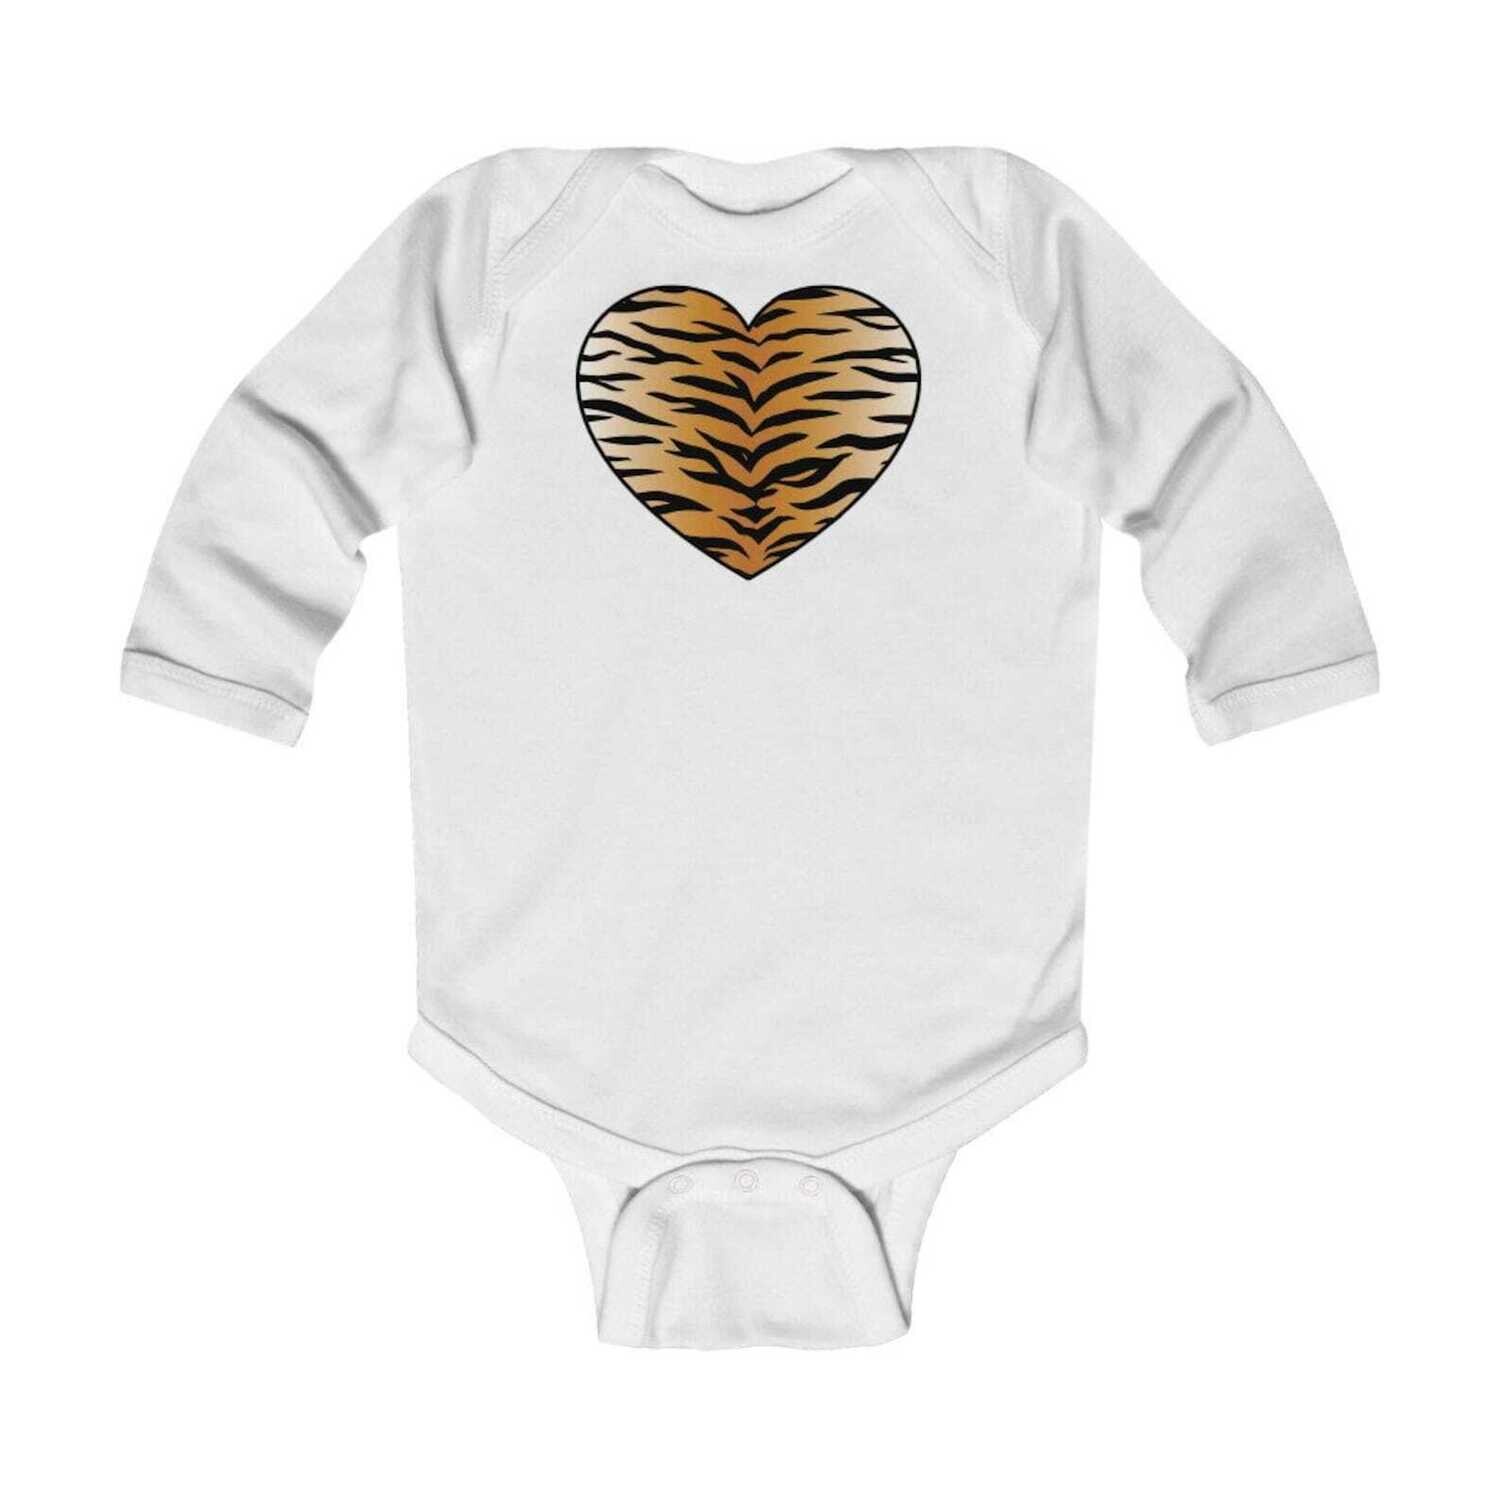 👸🏽🤴🏽🐅 Baby long sleeve one piece bodysuit Tiger print, 100% cotton soft baby onesie, Gift for Animal Lovers, Gift for Cat Lovers, Made in the USA